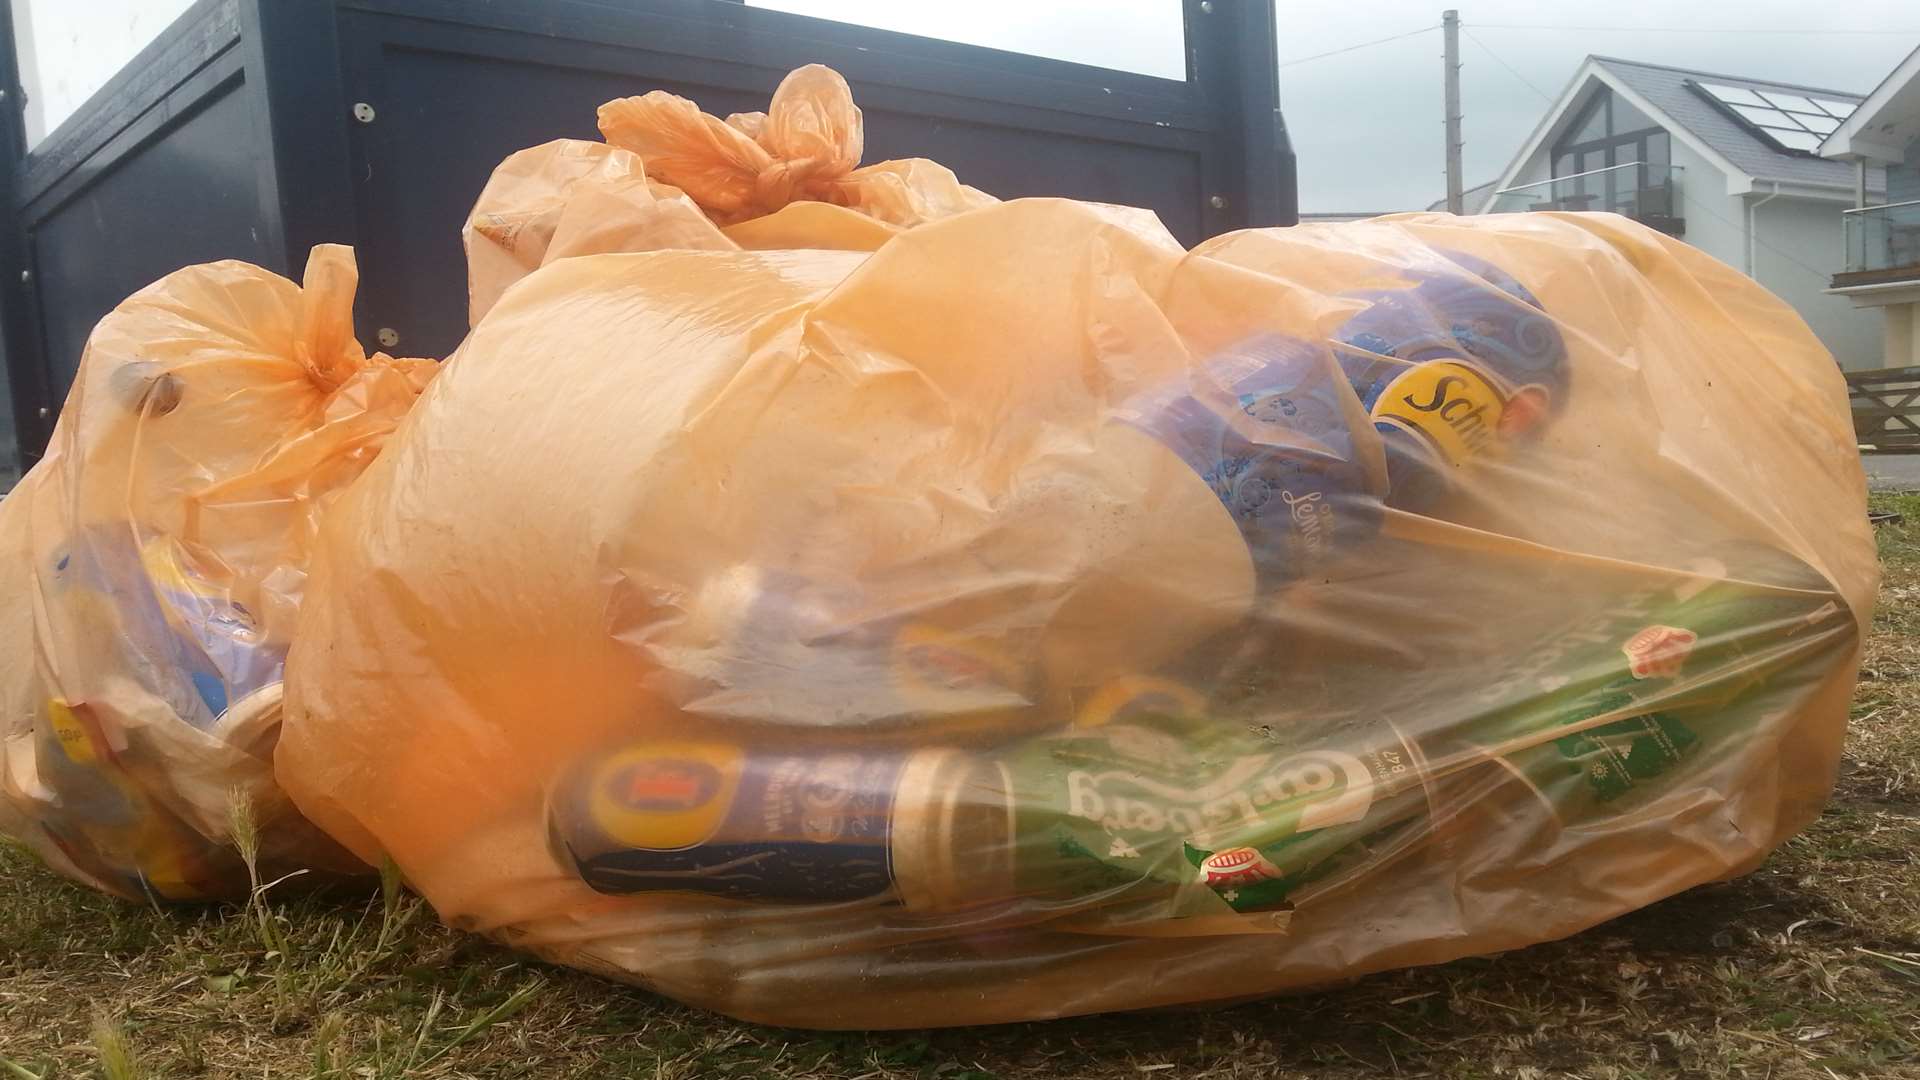 Beer cans were collected on Marine Parade this morning